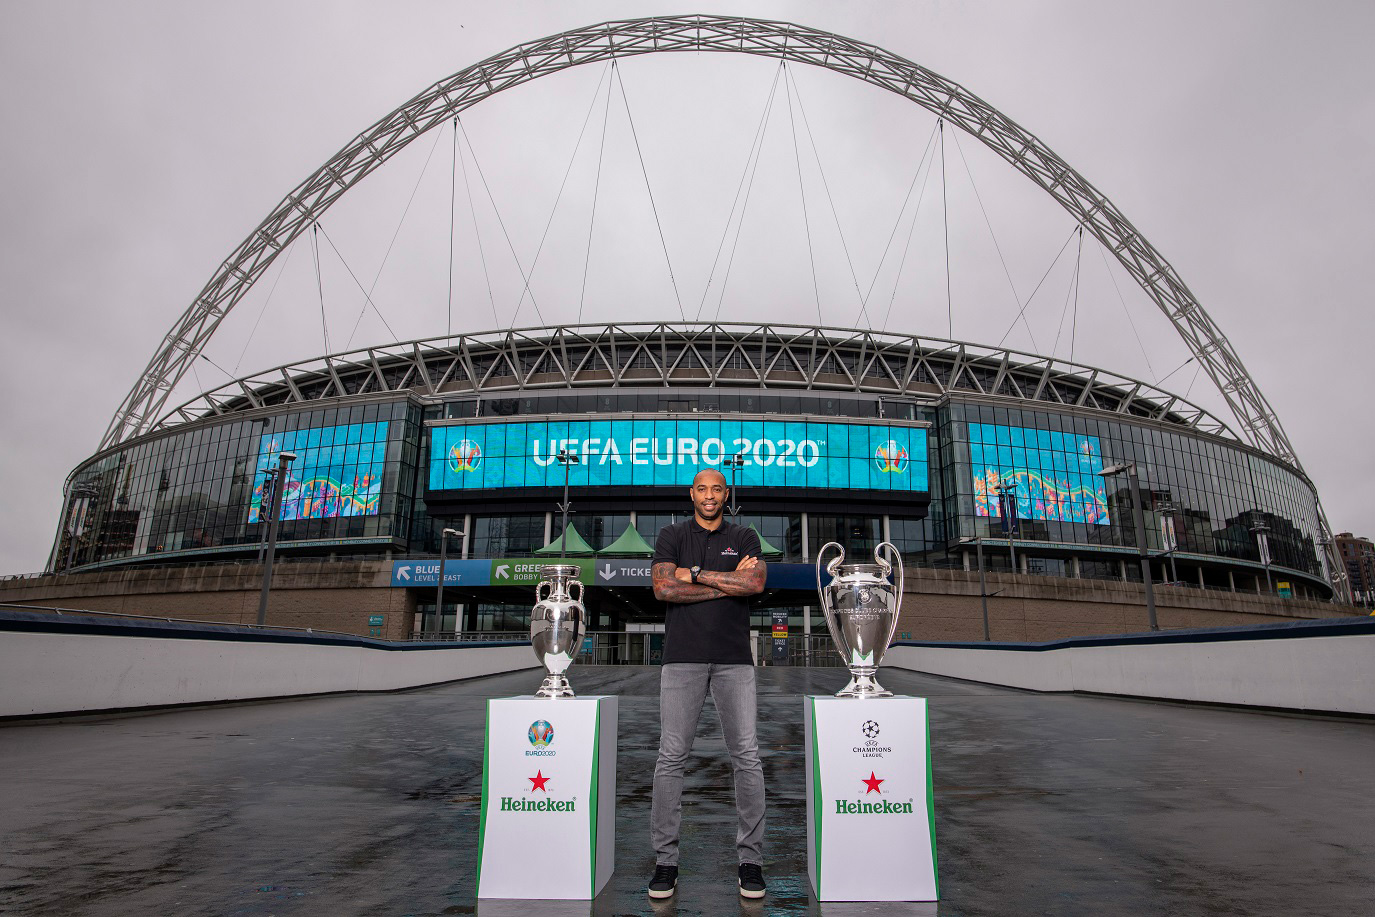 Thierry Henry stands in front of Wembley - Heineken to be official UEFA Euro 2020 beer partner